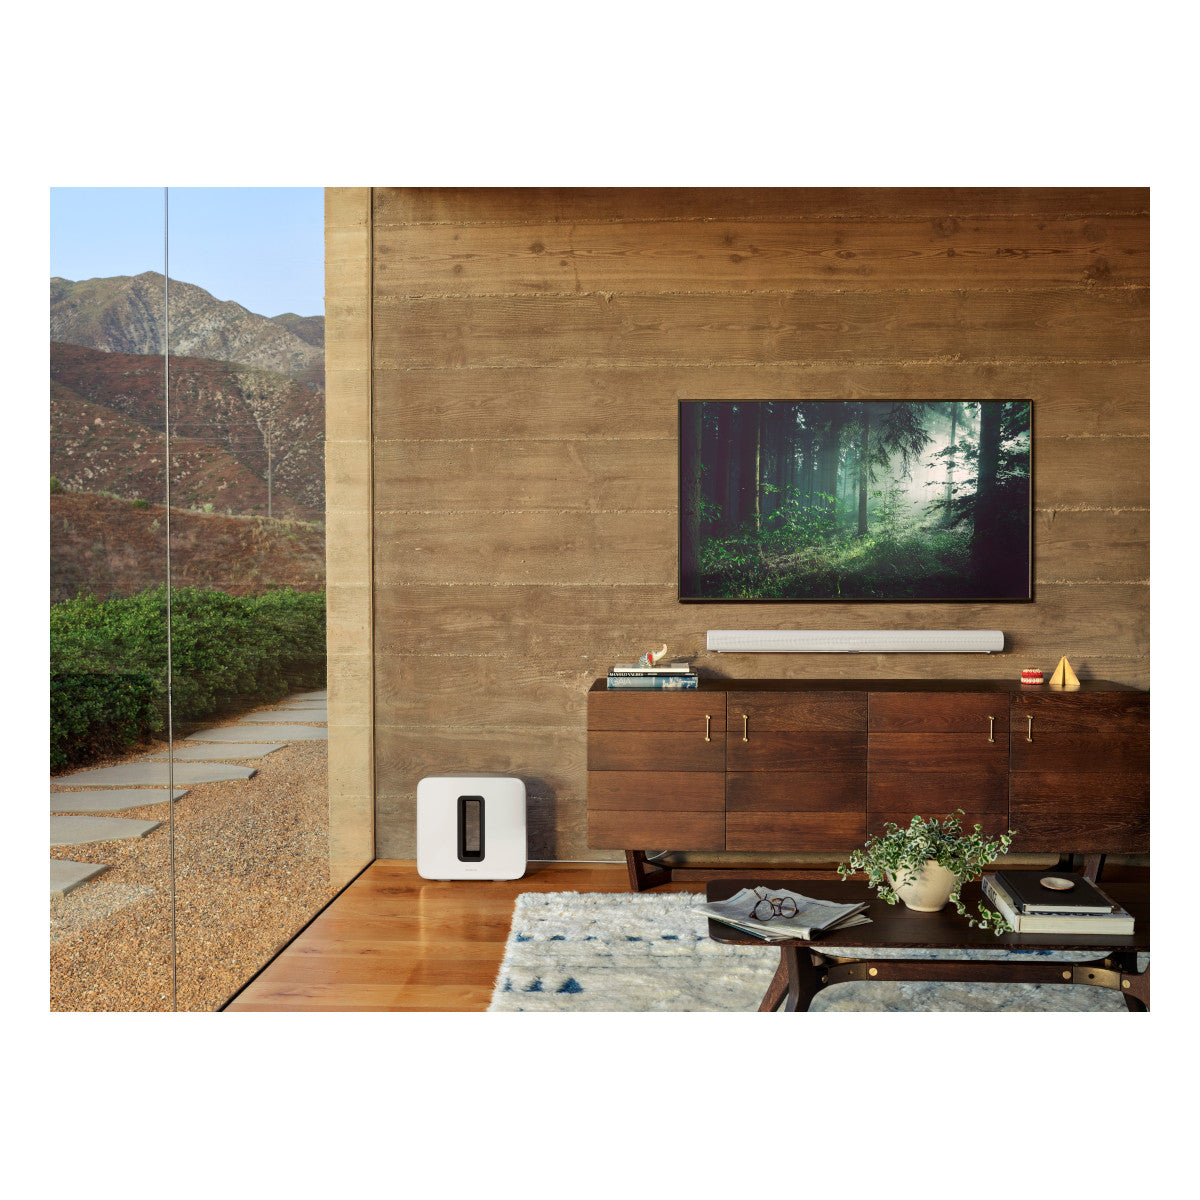 Sonos Entertainment Set with Arc Wireless Dolby Atmos Sound Bar and Gen 3. Subwoofers - Pair (White)